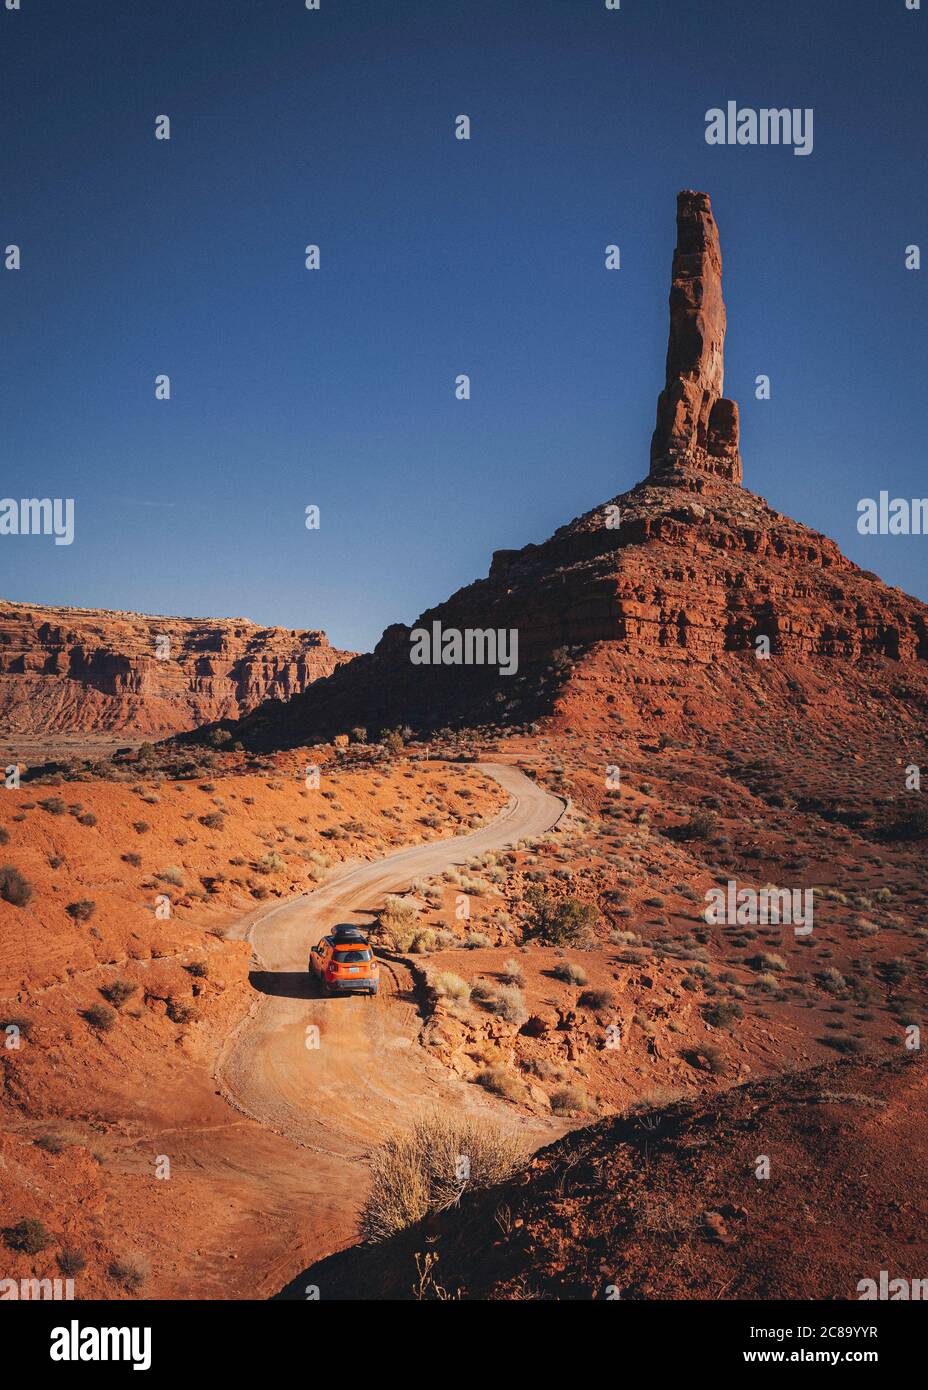 An orange car is driving through the Valley of Gods, Utah Stock Photo